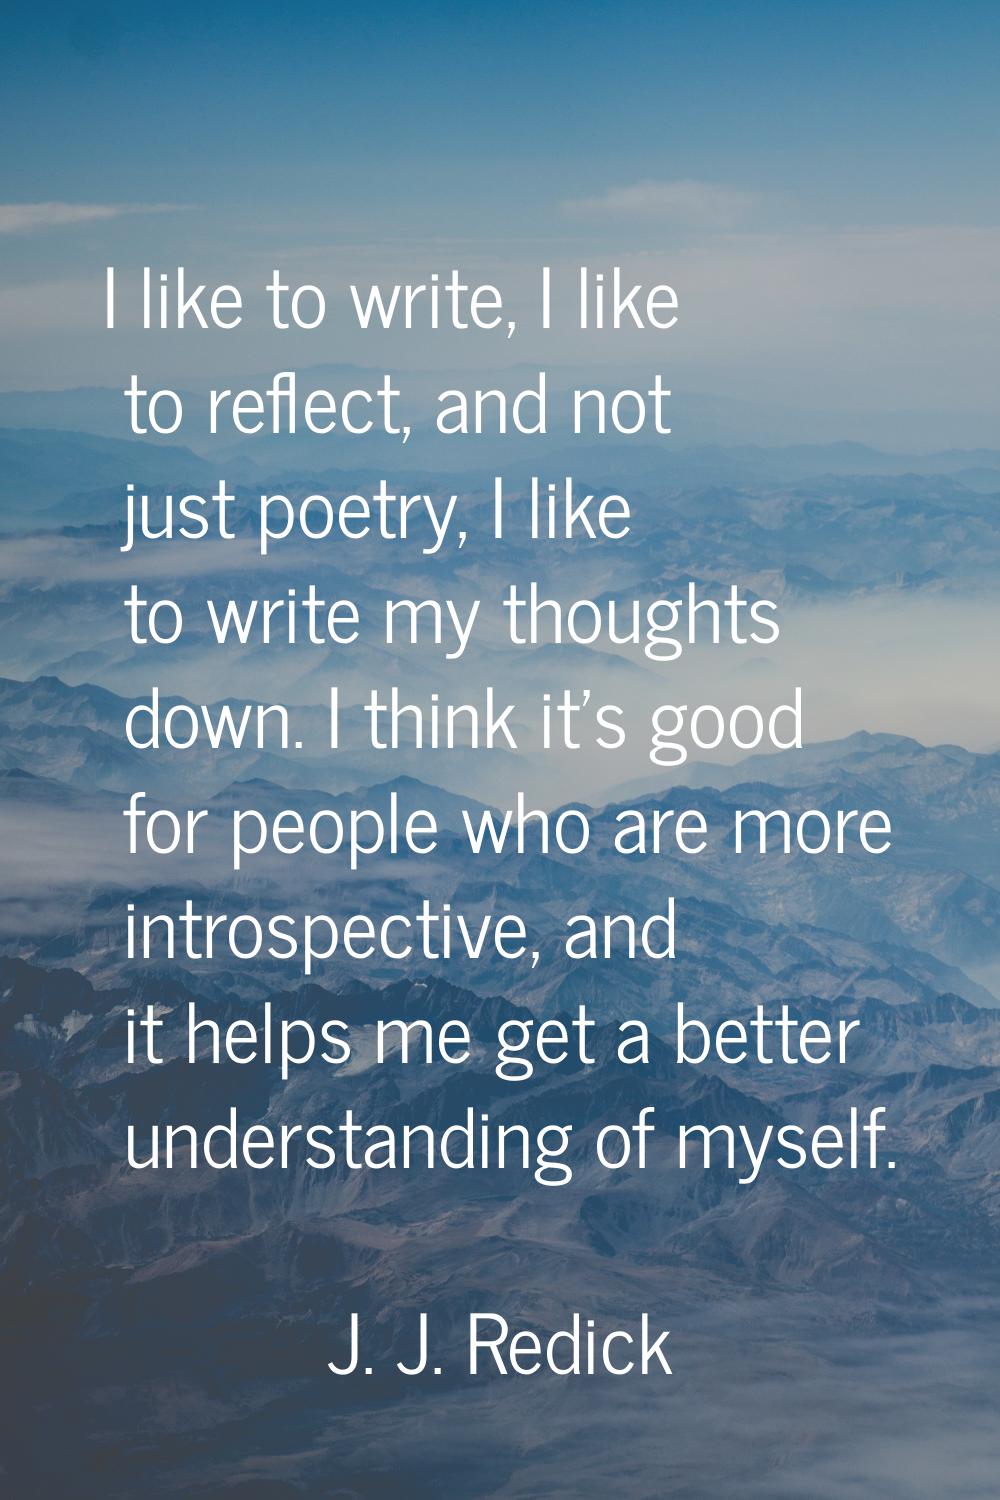 I like to write, I like to reflect, and not just poetry, I like to write my thoughts down. I think 